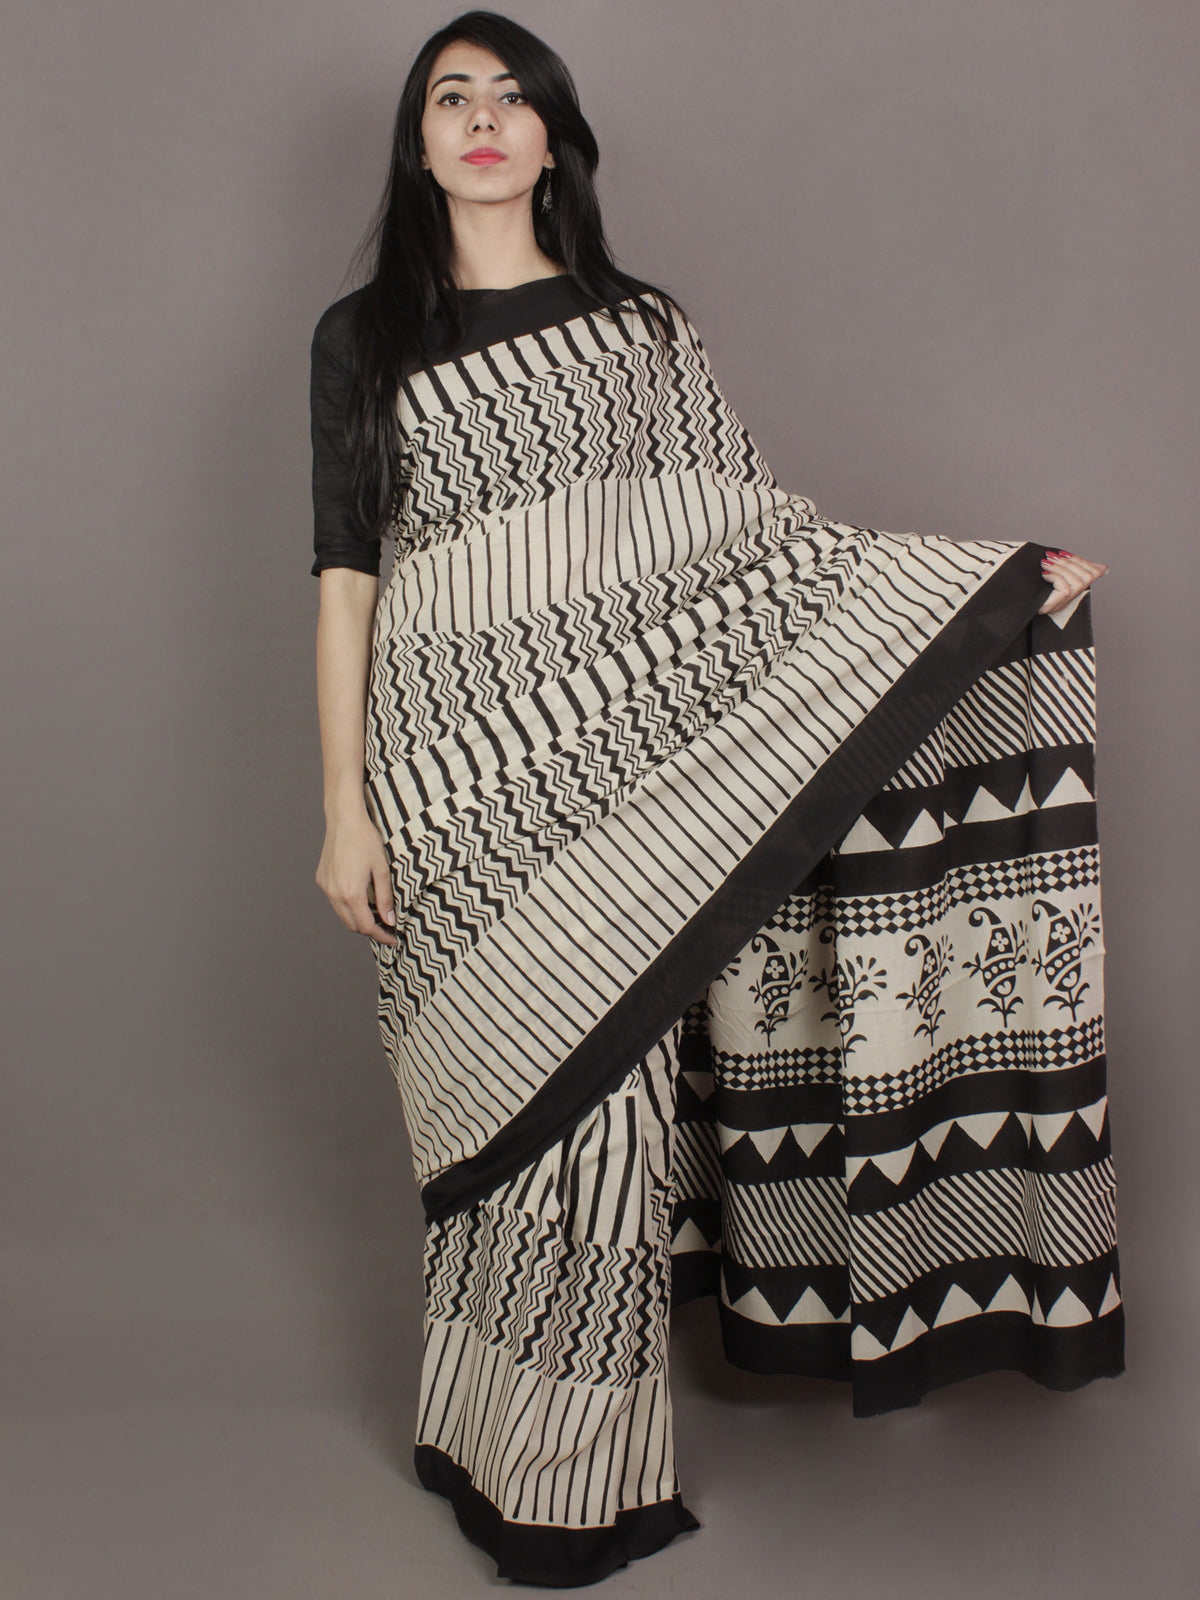 Ivory Black Hand Block Printed in Natural Colors Cotton Mul Saree - S031701167